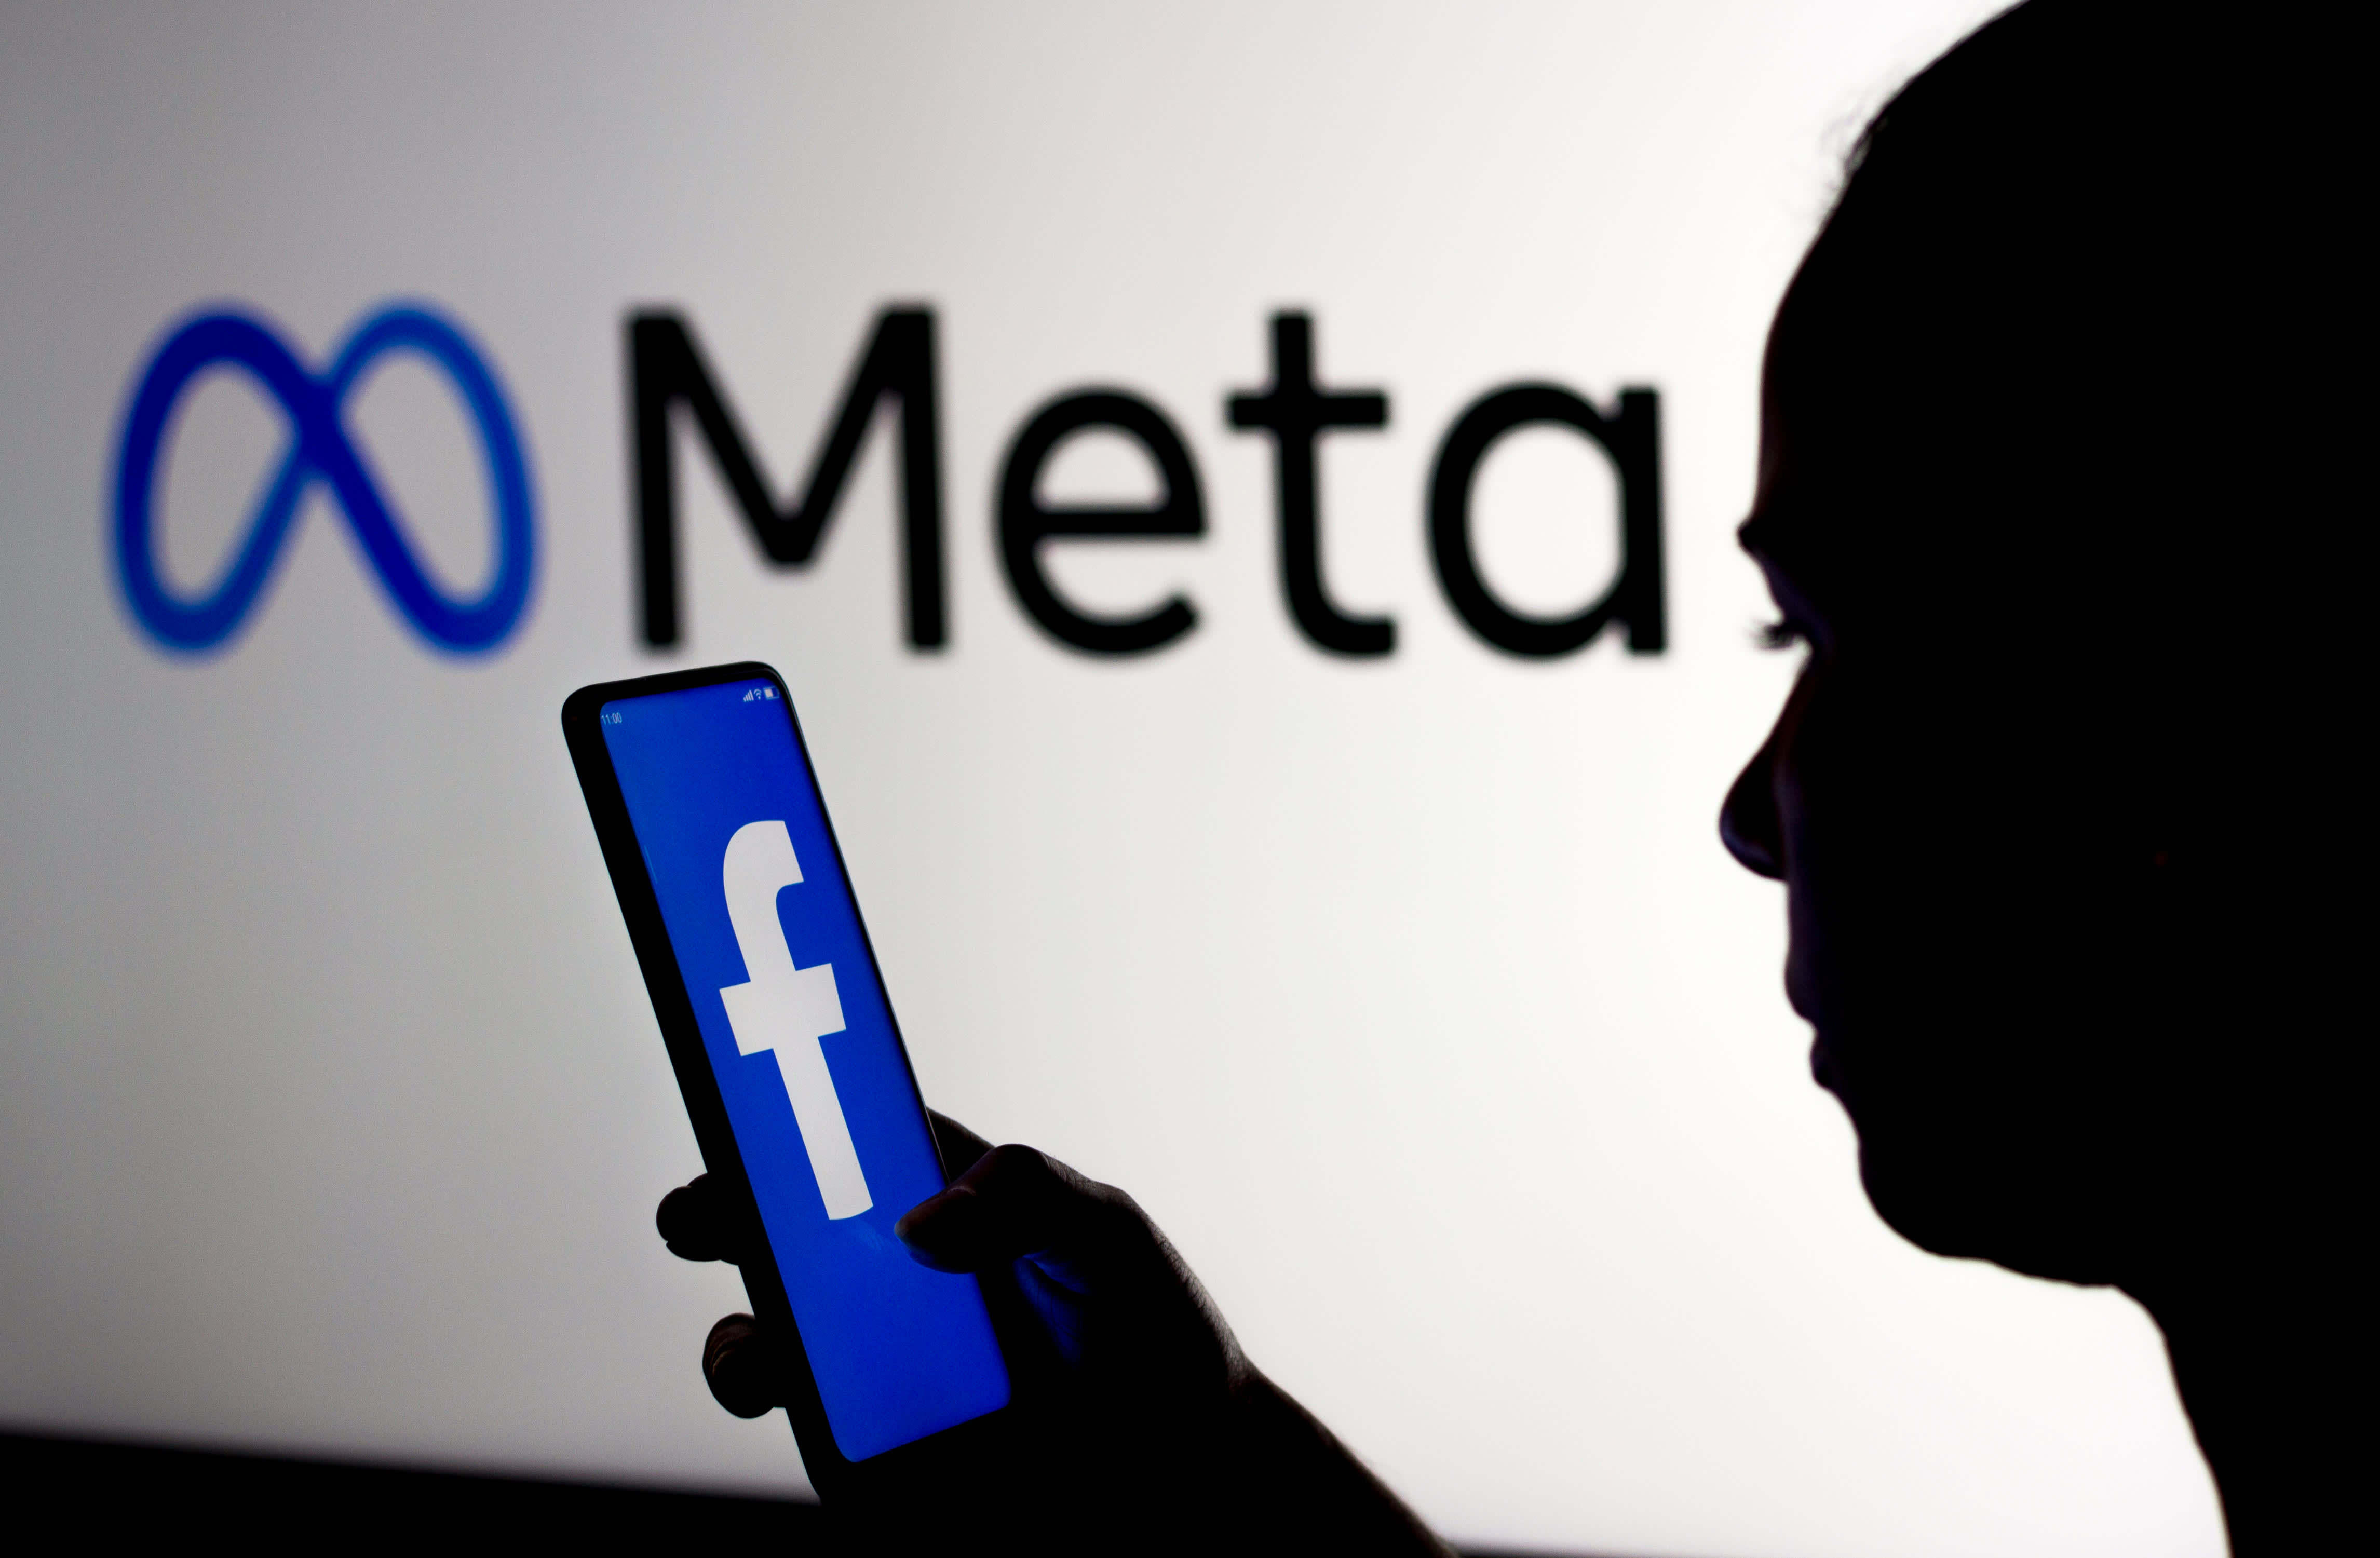 Meta is a 'top recession stock' for 2023, analysts say, after shares tanked 65% this year